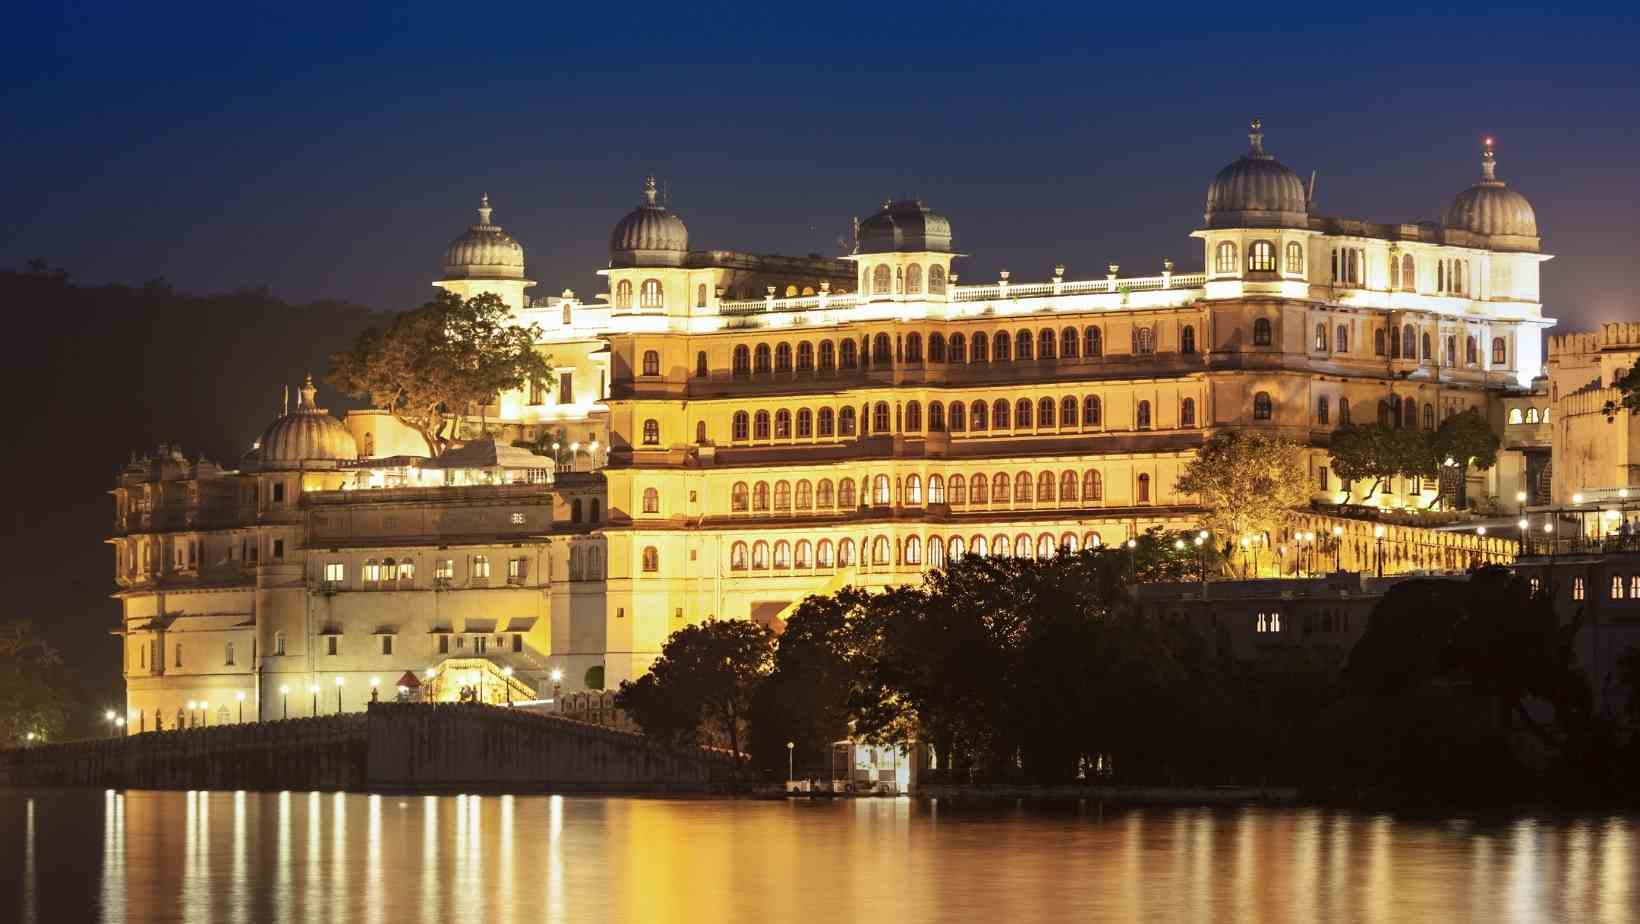 The City Palace in Udaipur - Best Places To Visit In Udaipur